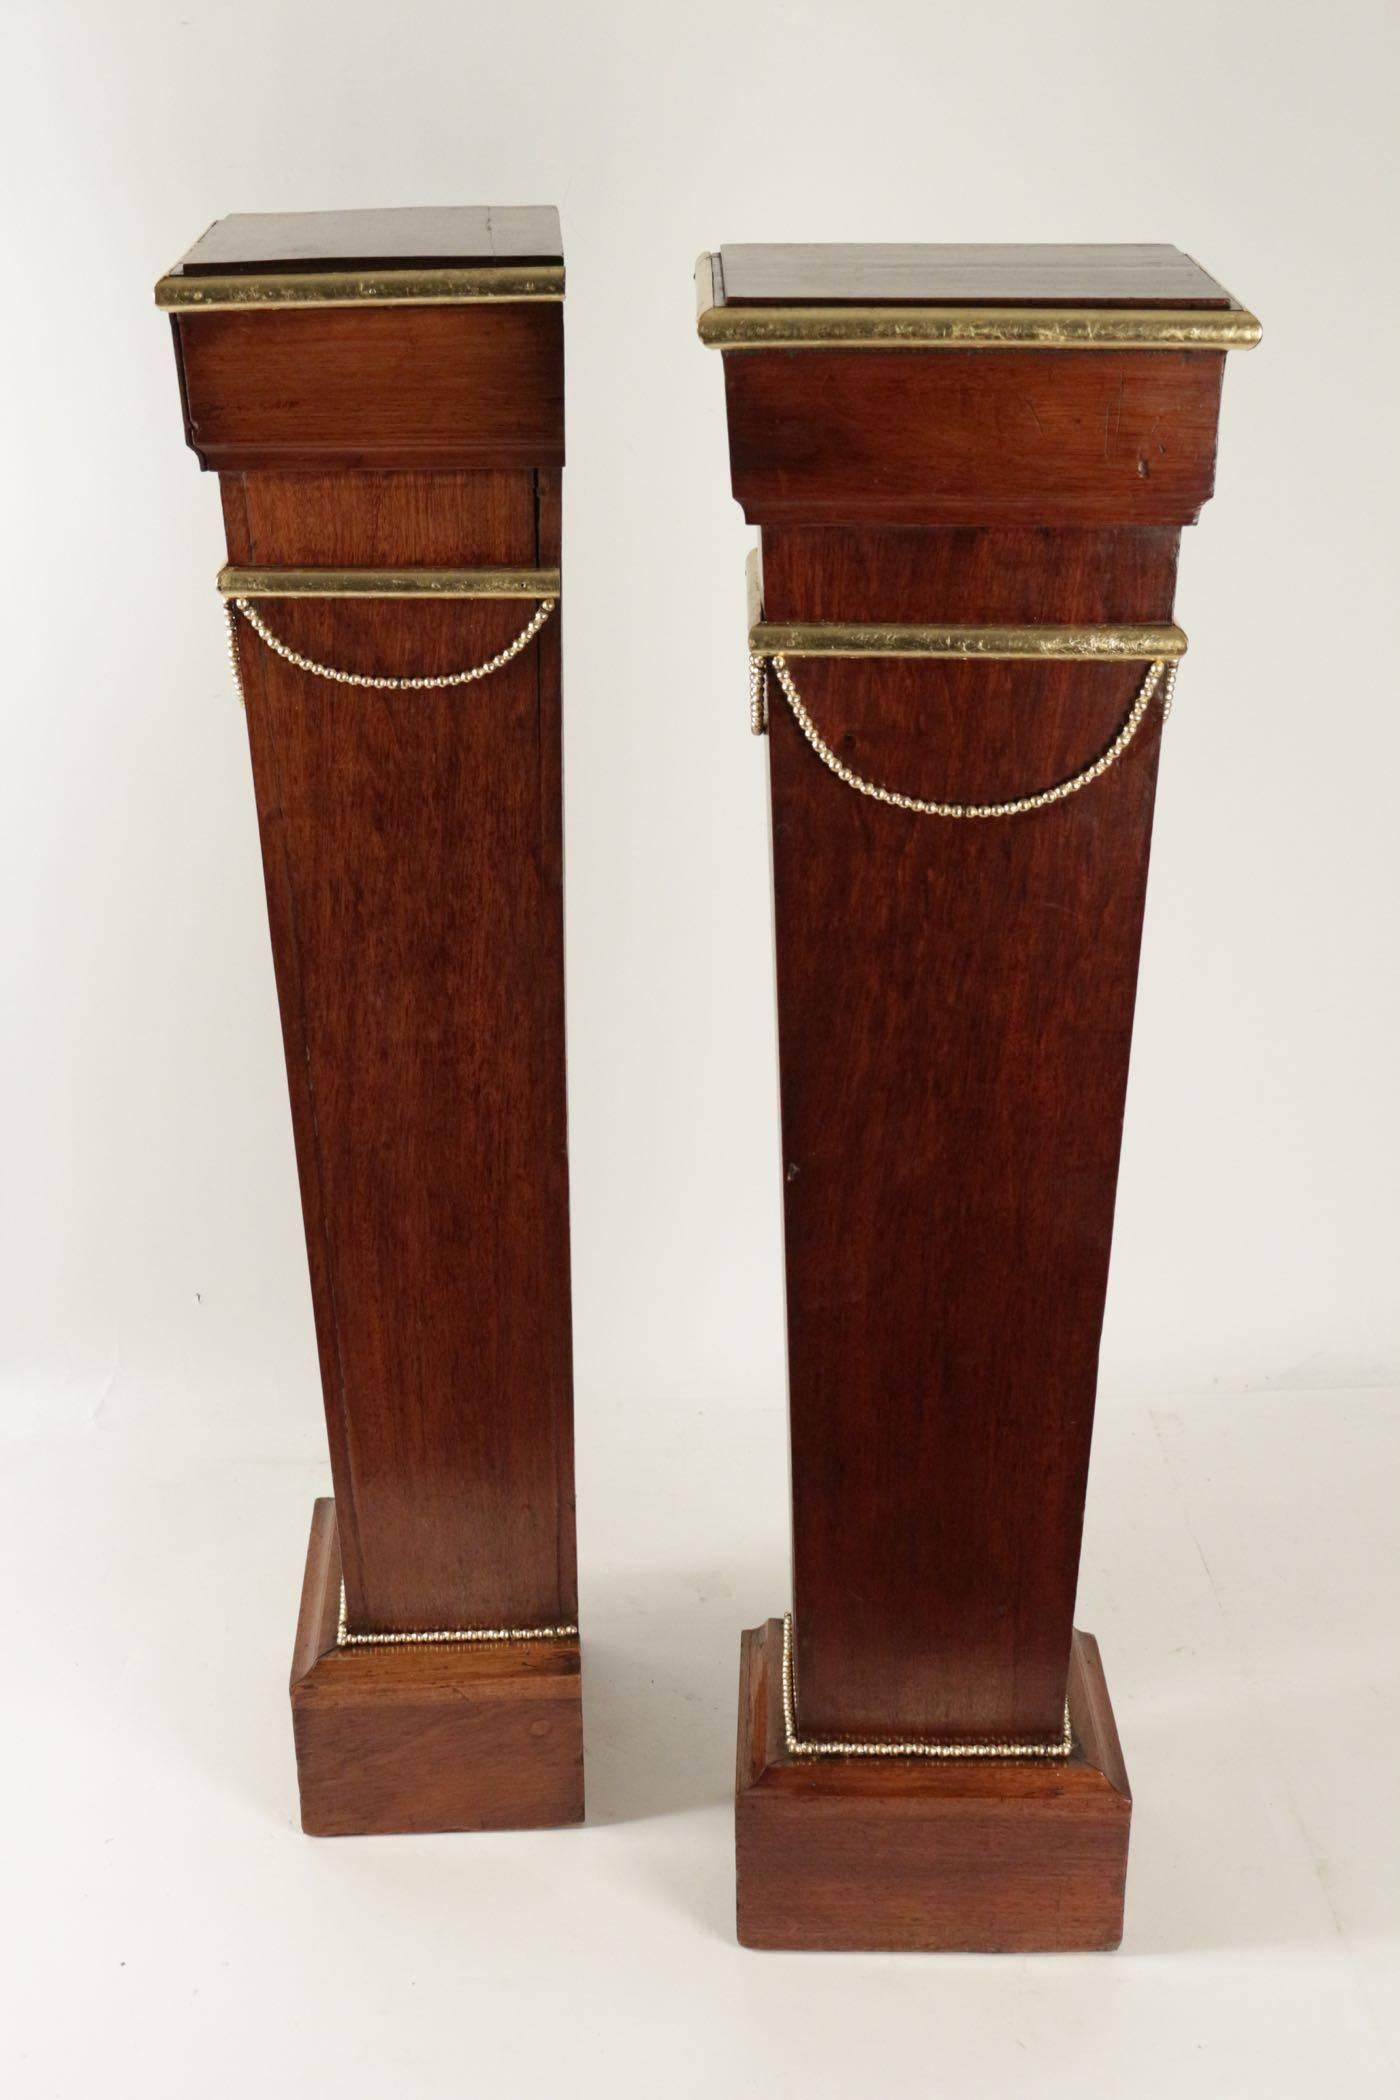 Pair of Sheaths, Consoles, Mahogany, Golden at the Gold Leaf, 19th Century For Sale 3